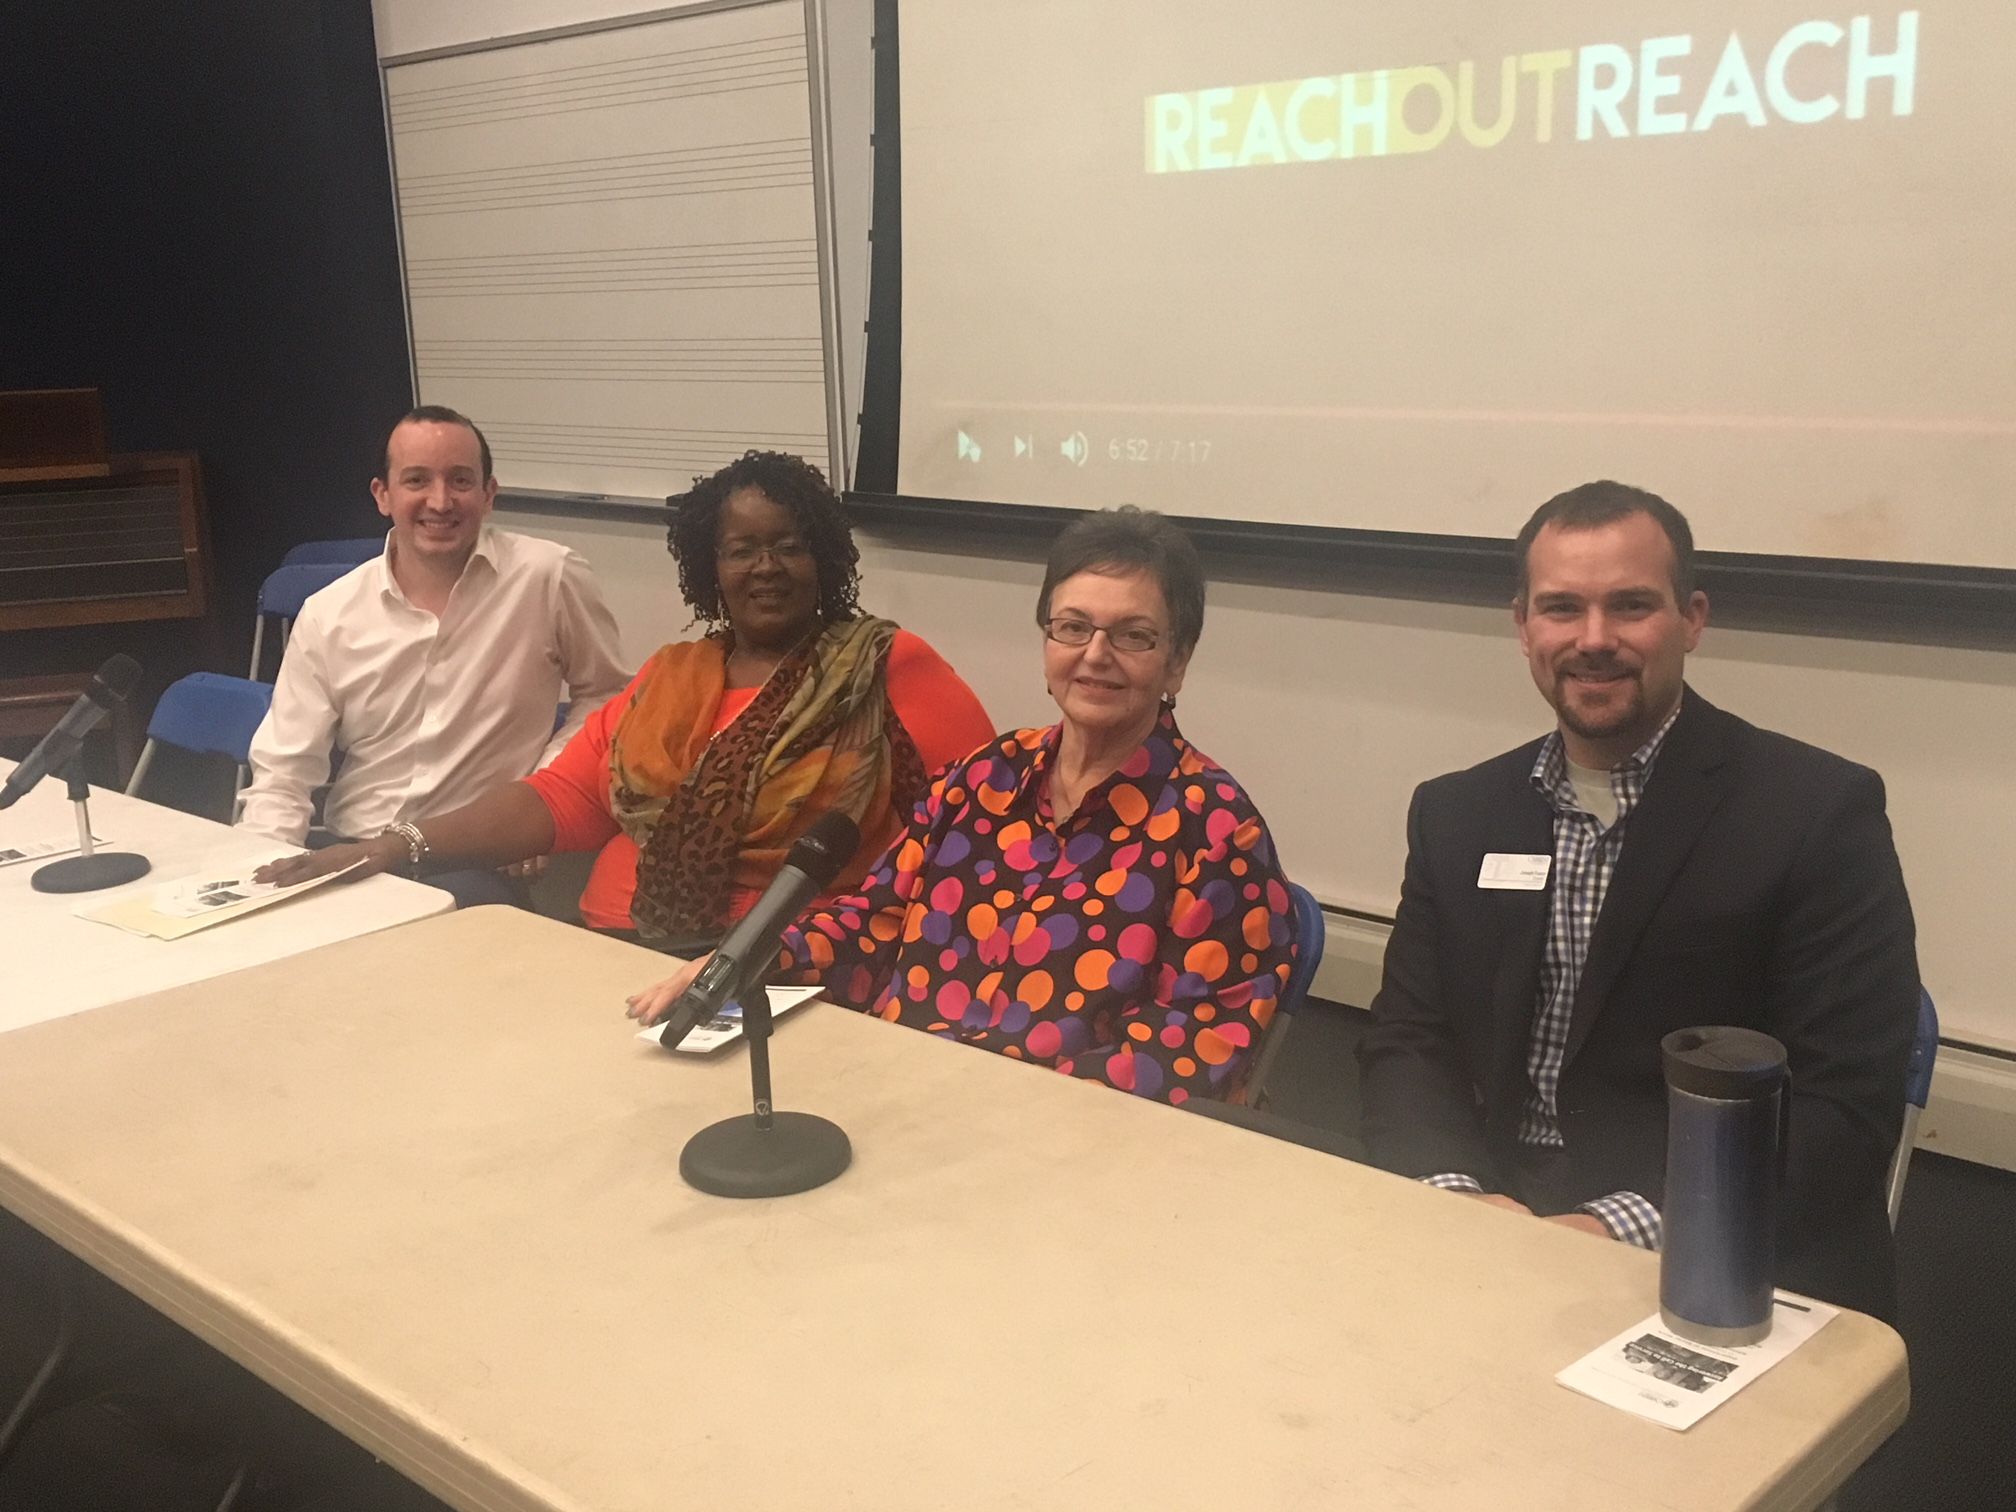 From left to right: Sean Whiteman, MSW, Tommie Wilkins, MA, Minna Davis, LPC, and Joe Fusco